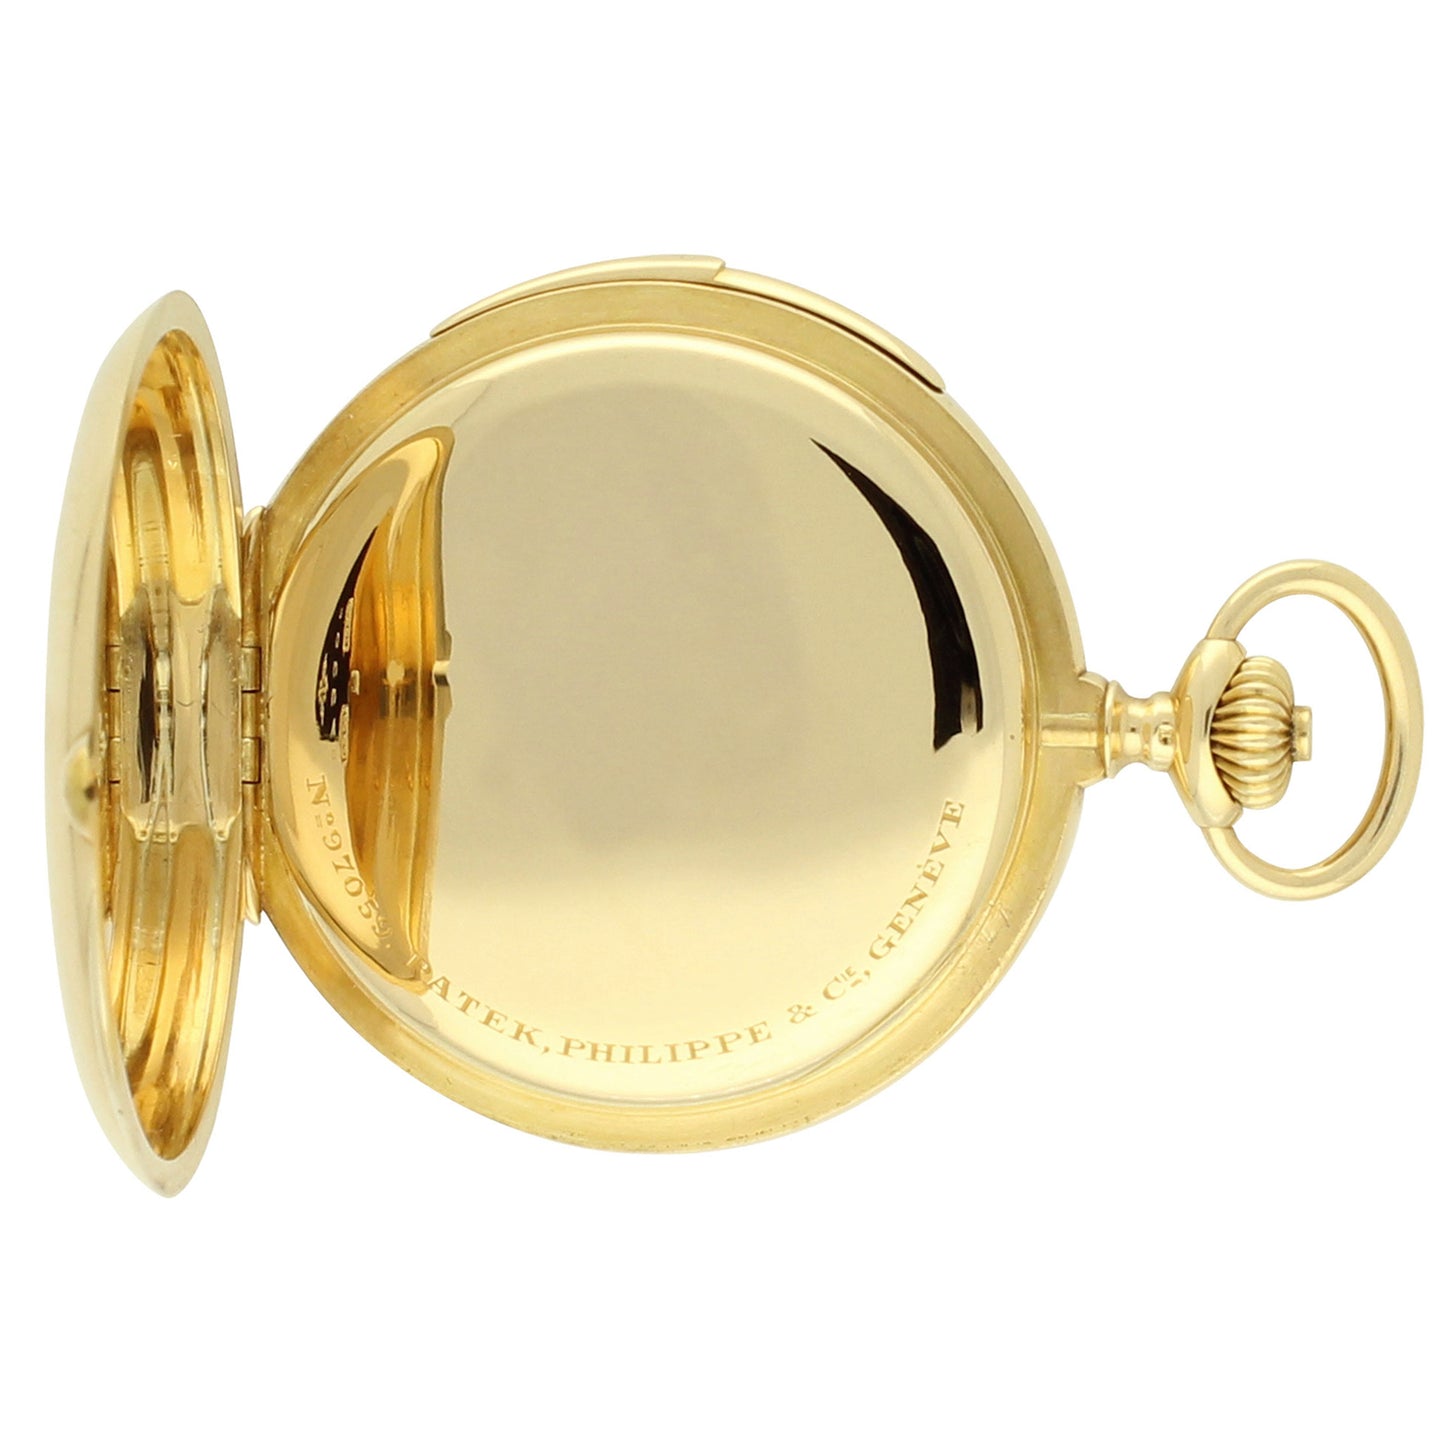 18ct yellow gold Patek Philippe hunter case five minute repeating pocket watch. Made 1892